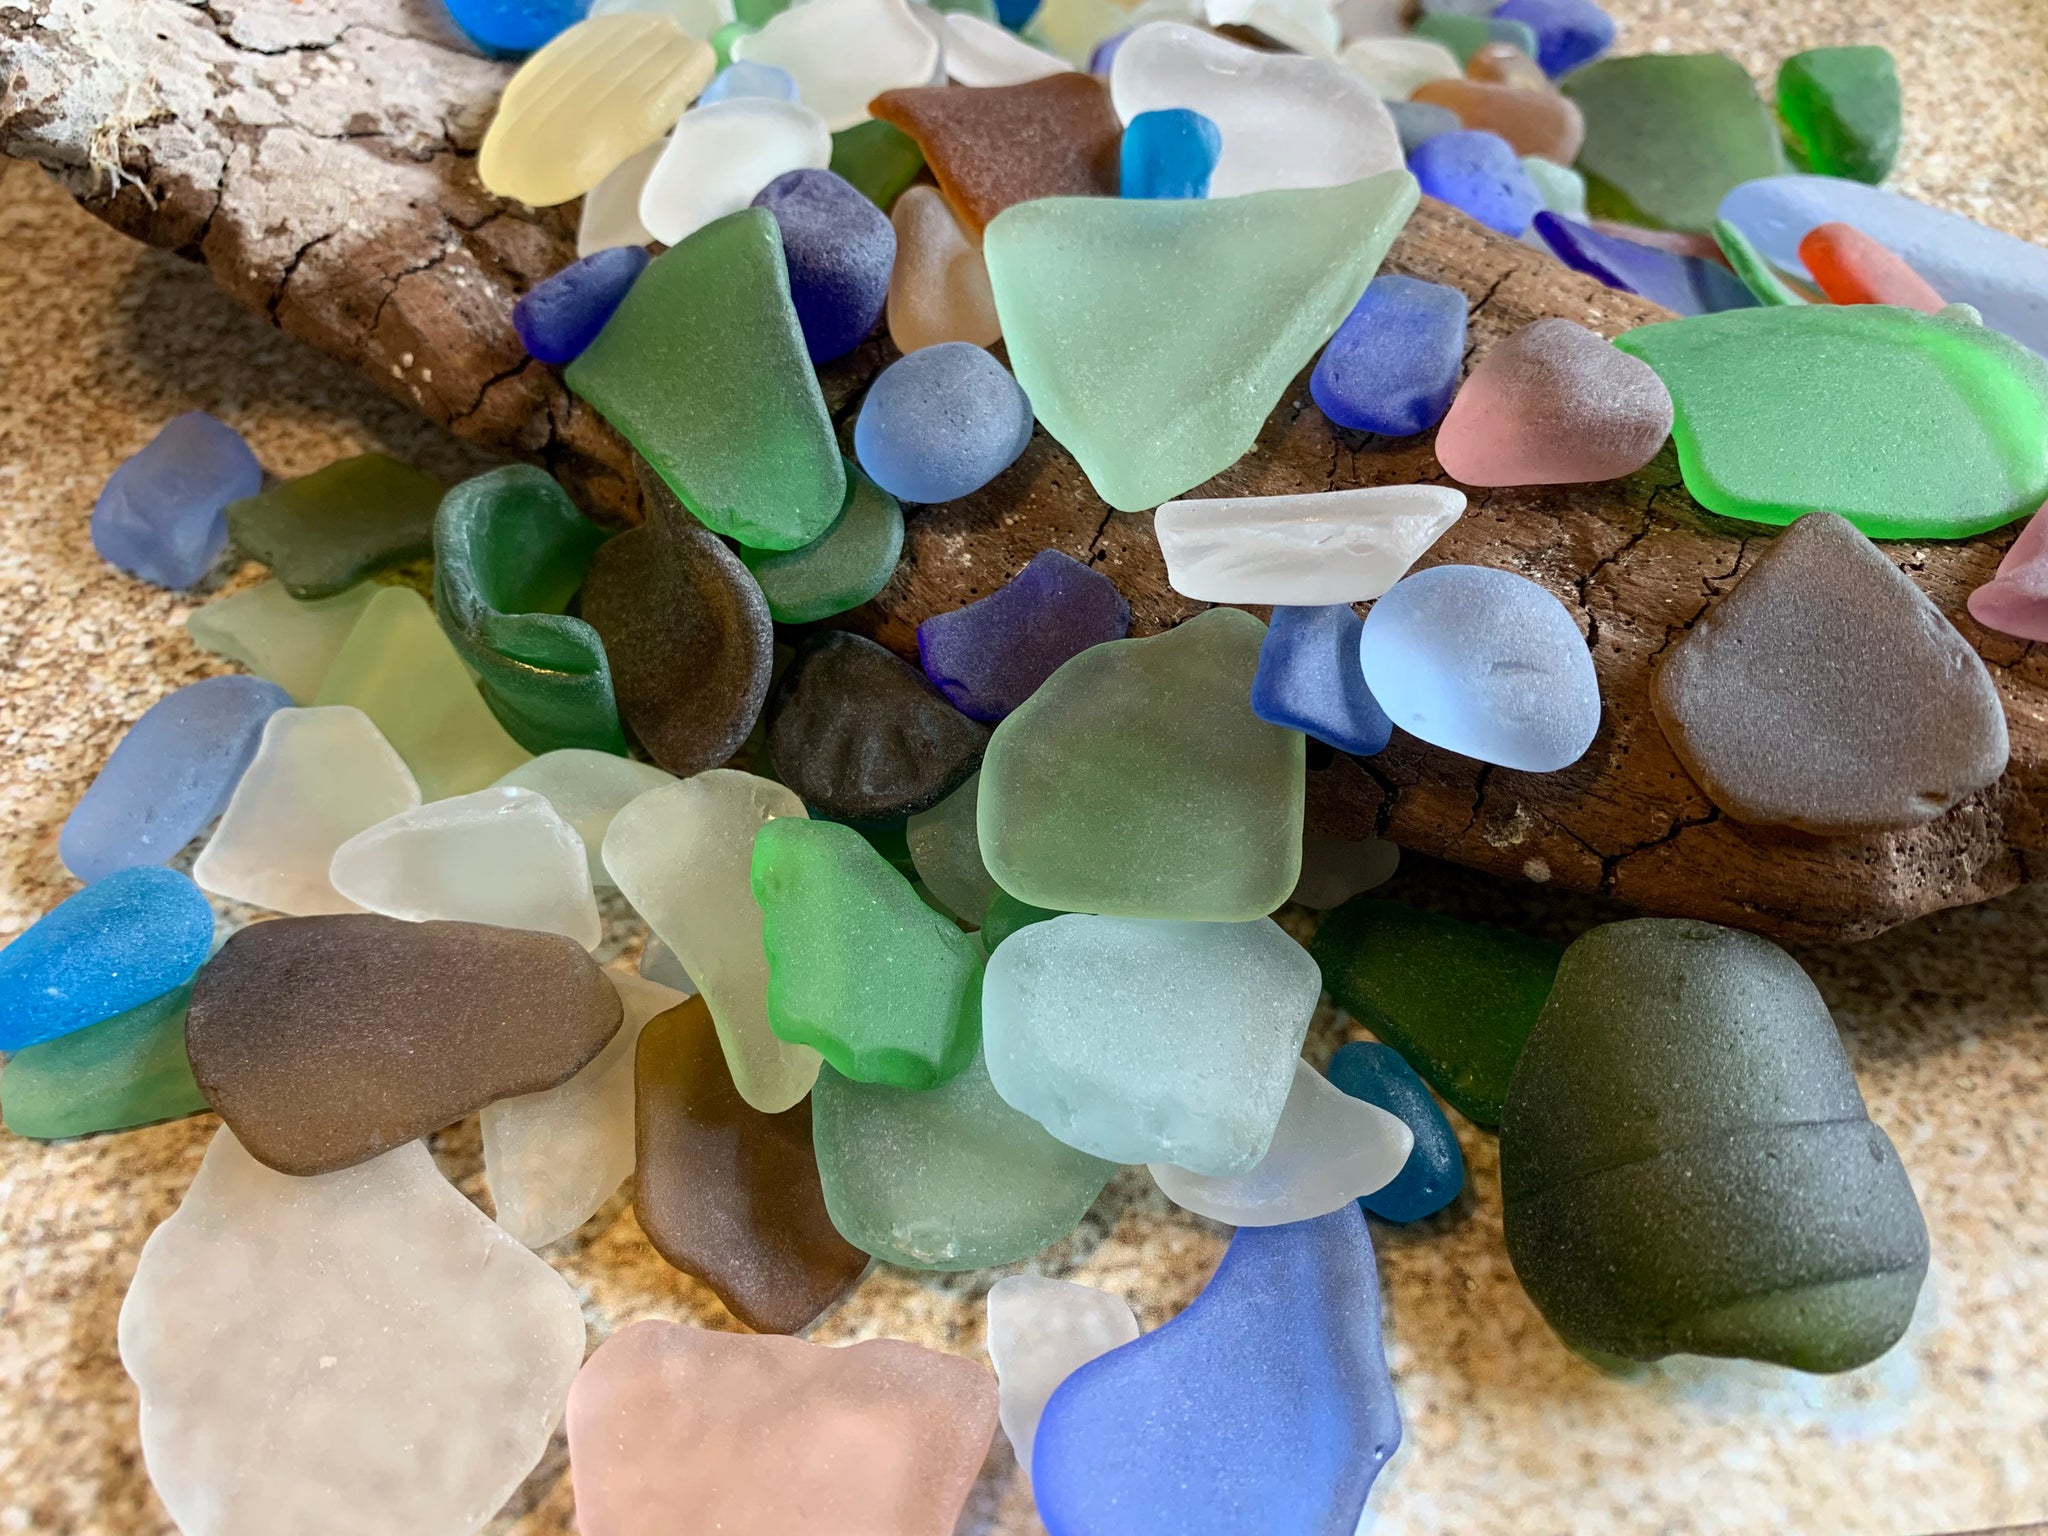 Clear Sea Glass Bulk , Small Size ,genuine Beach Glass for Crafts